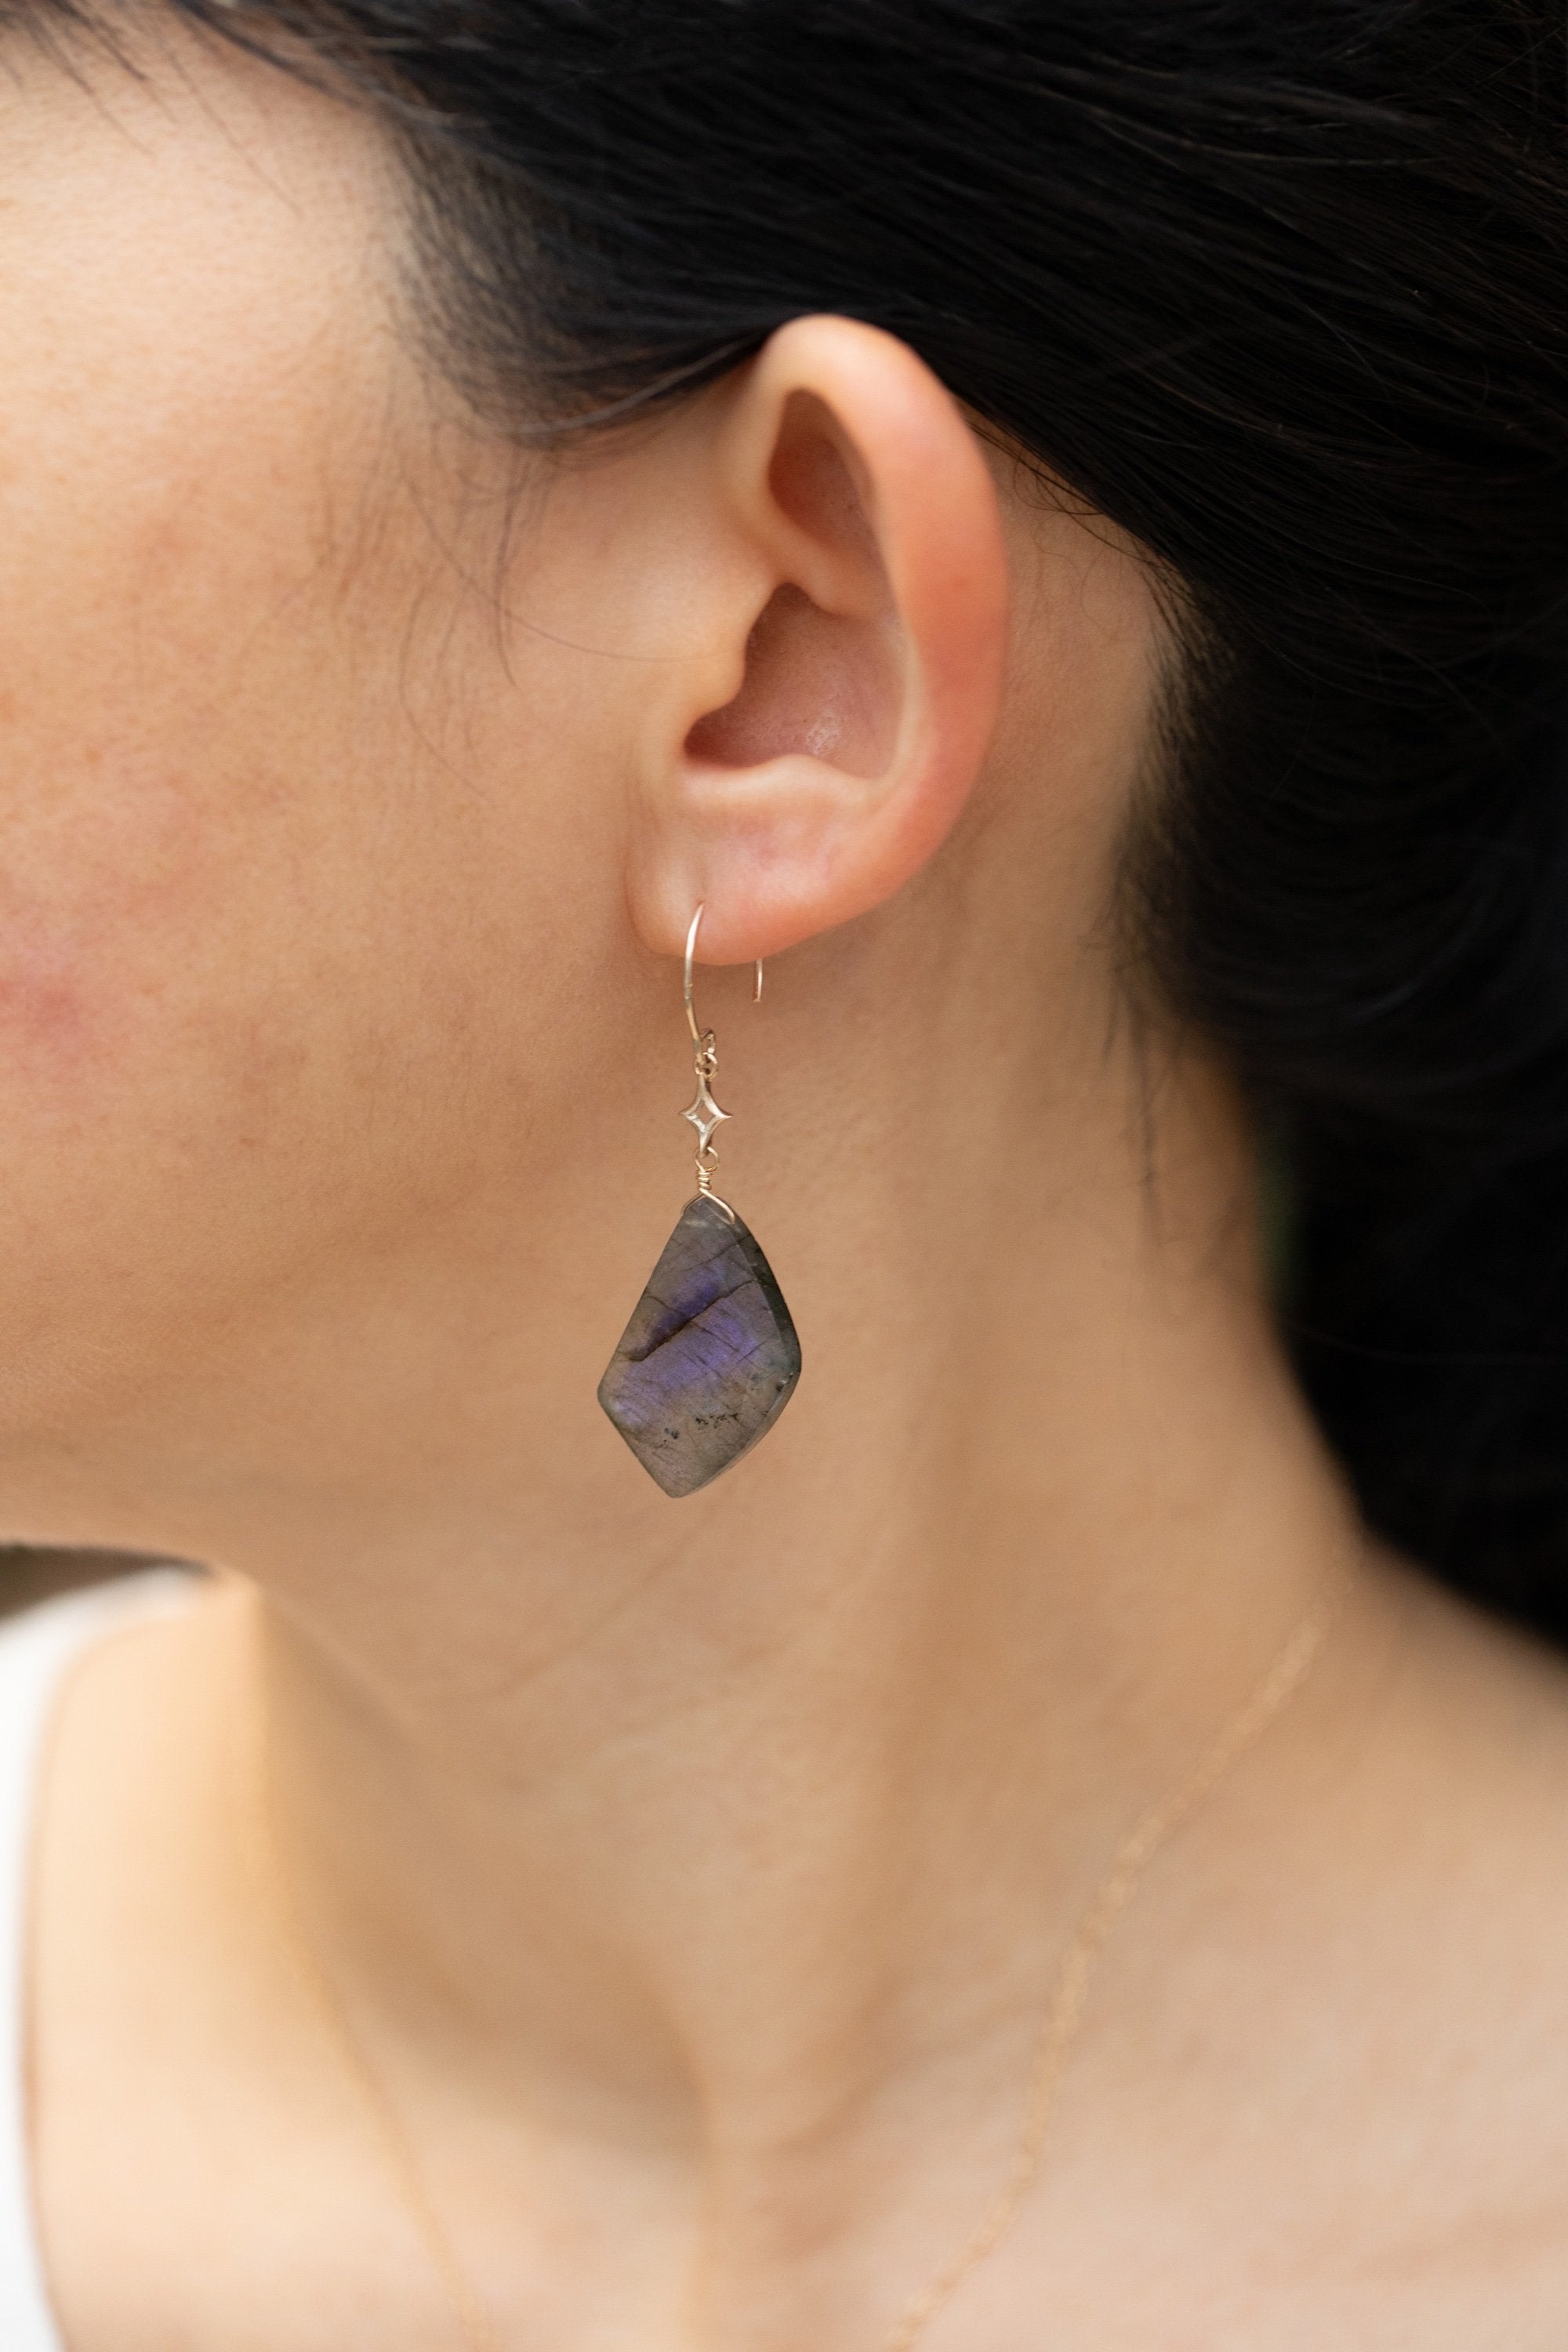 Labradorite Earrings with a Star Shape Accent (10k)